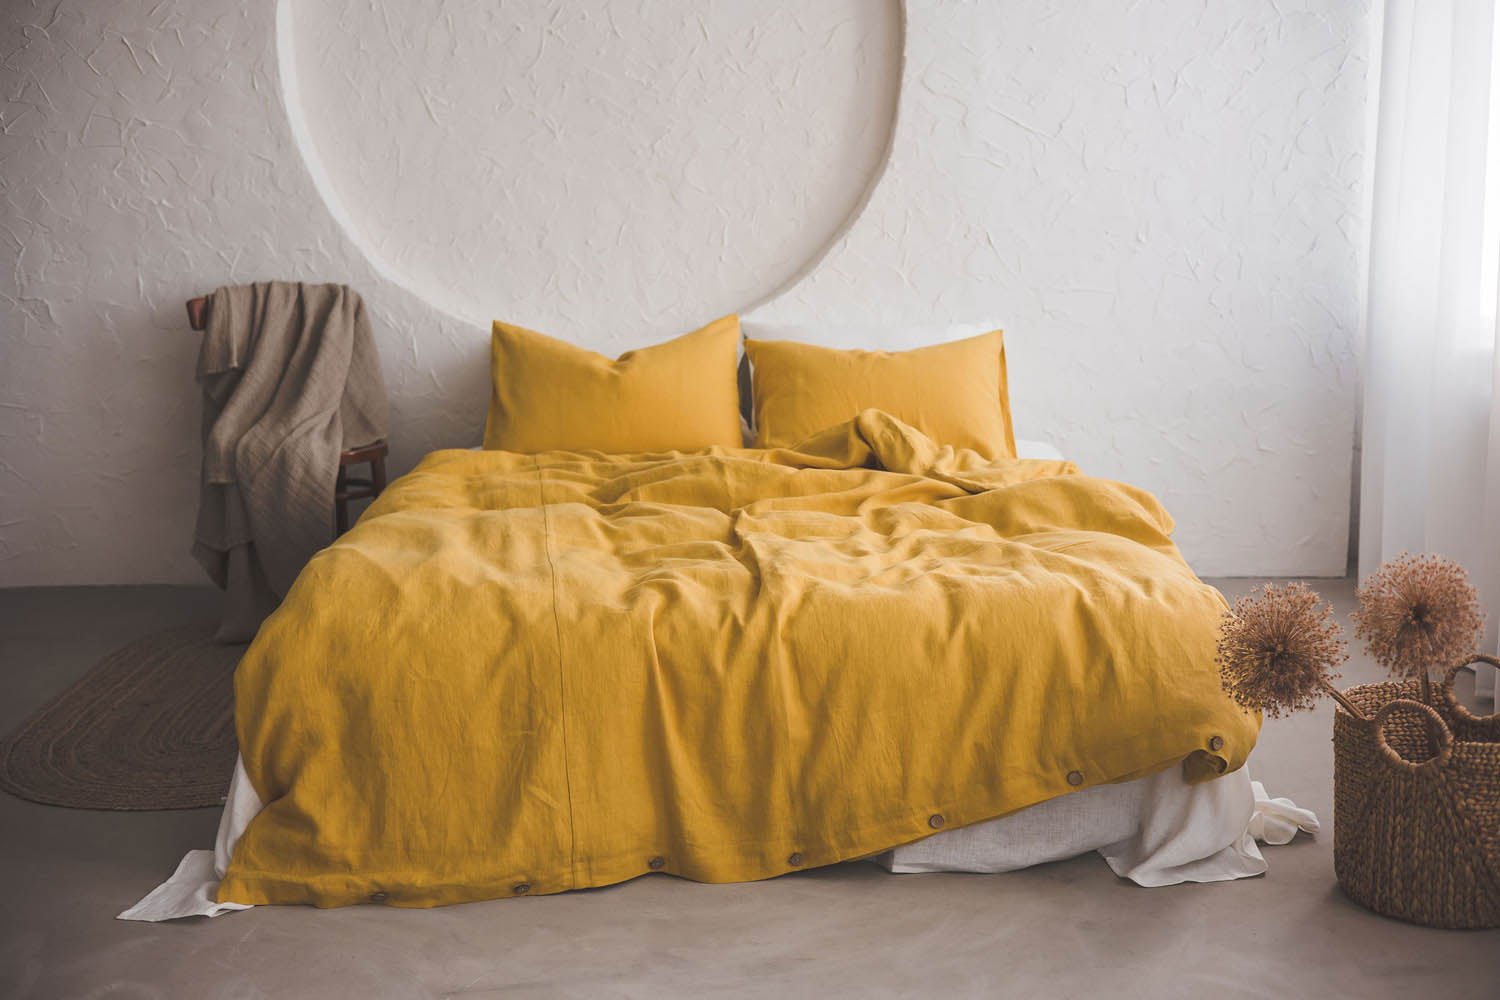 Mimosa yellow linen duvet cover with buttons